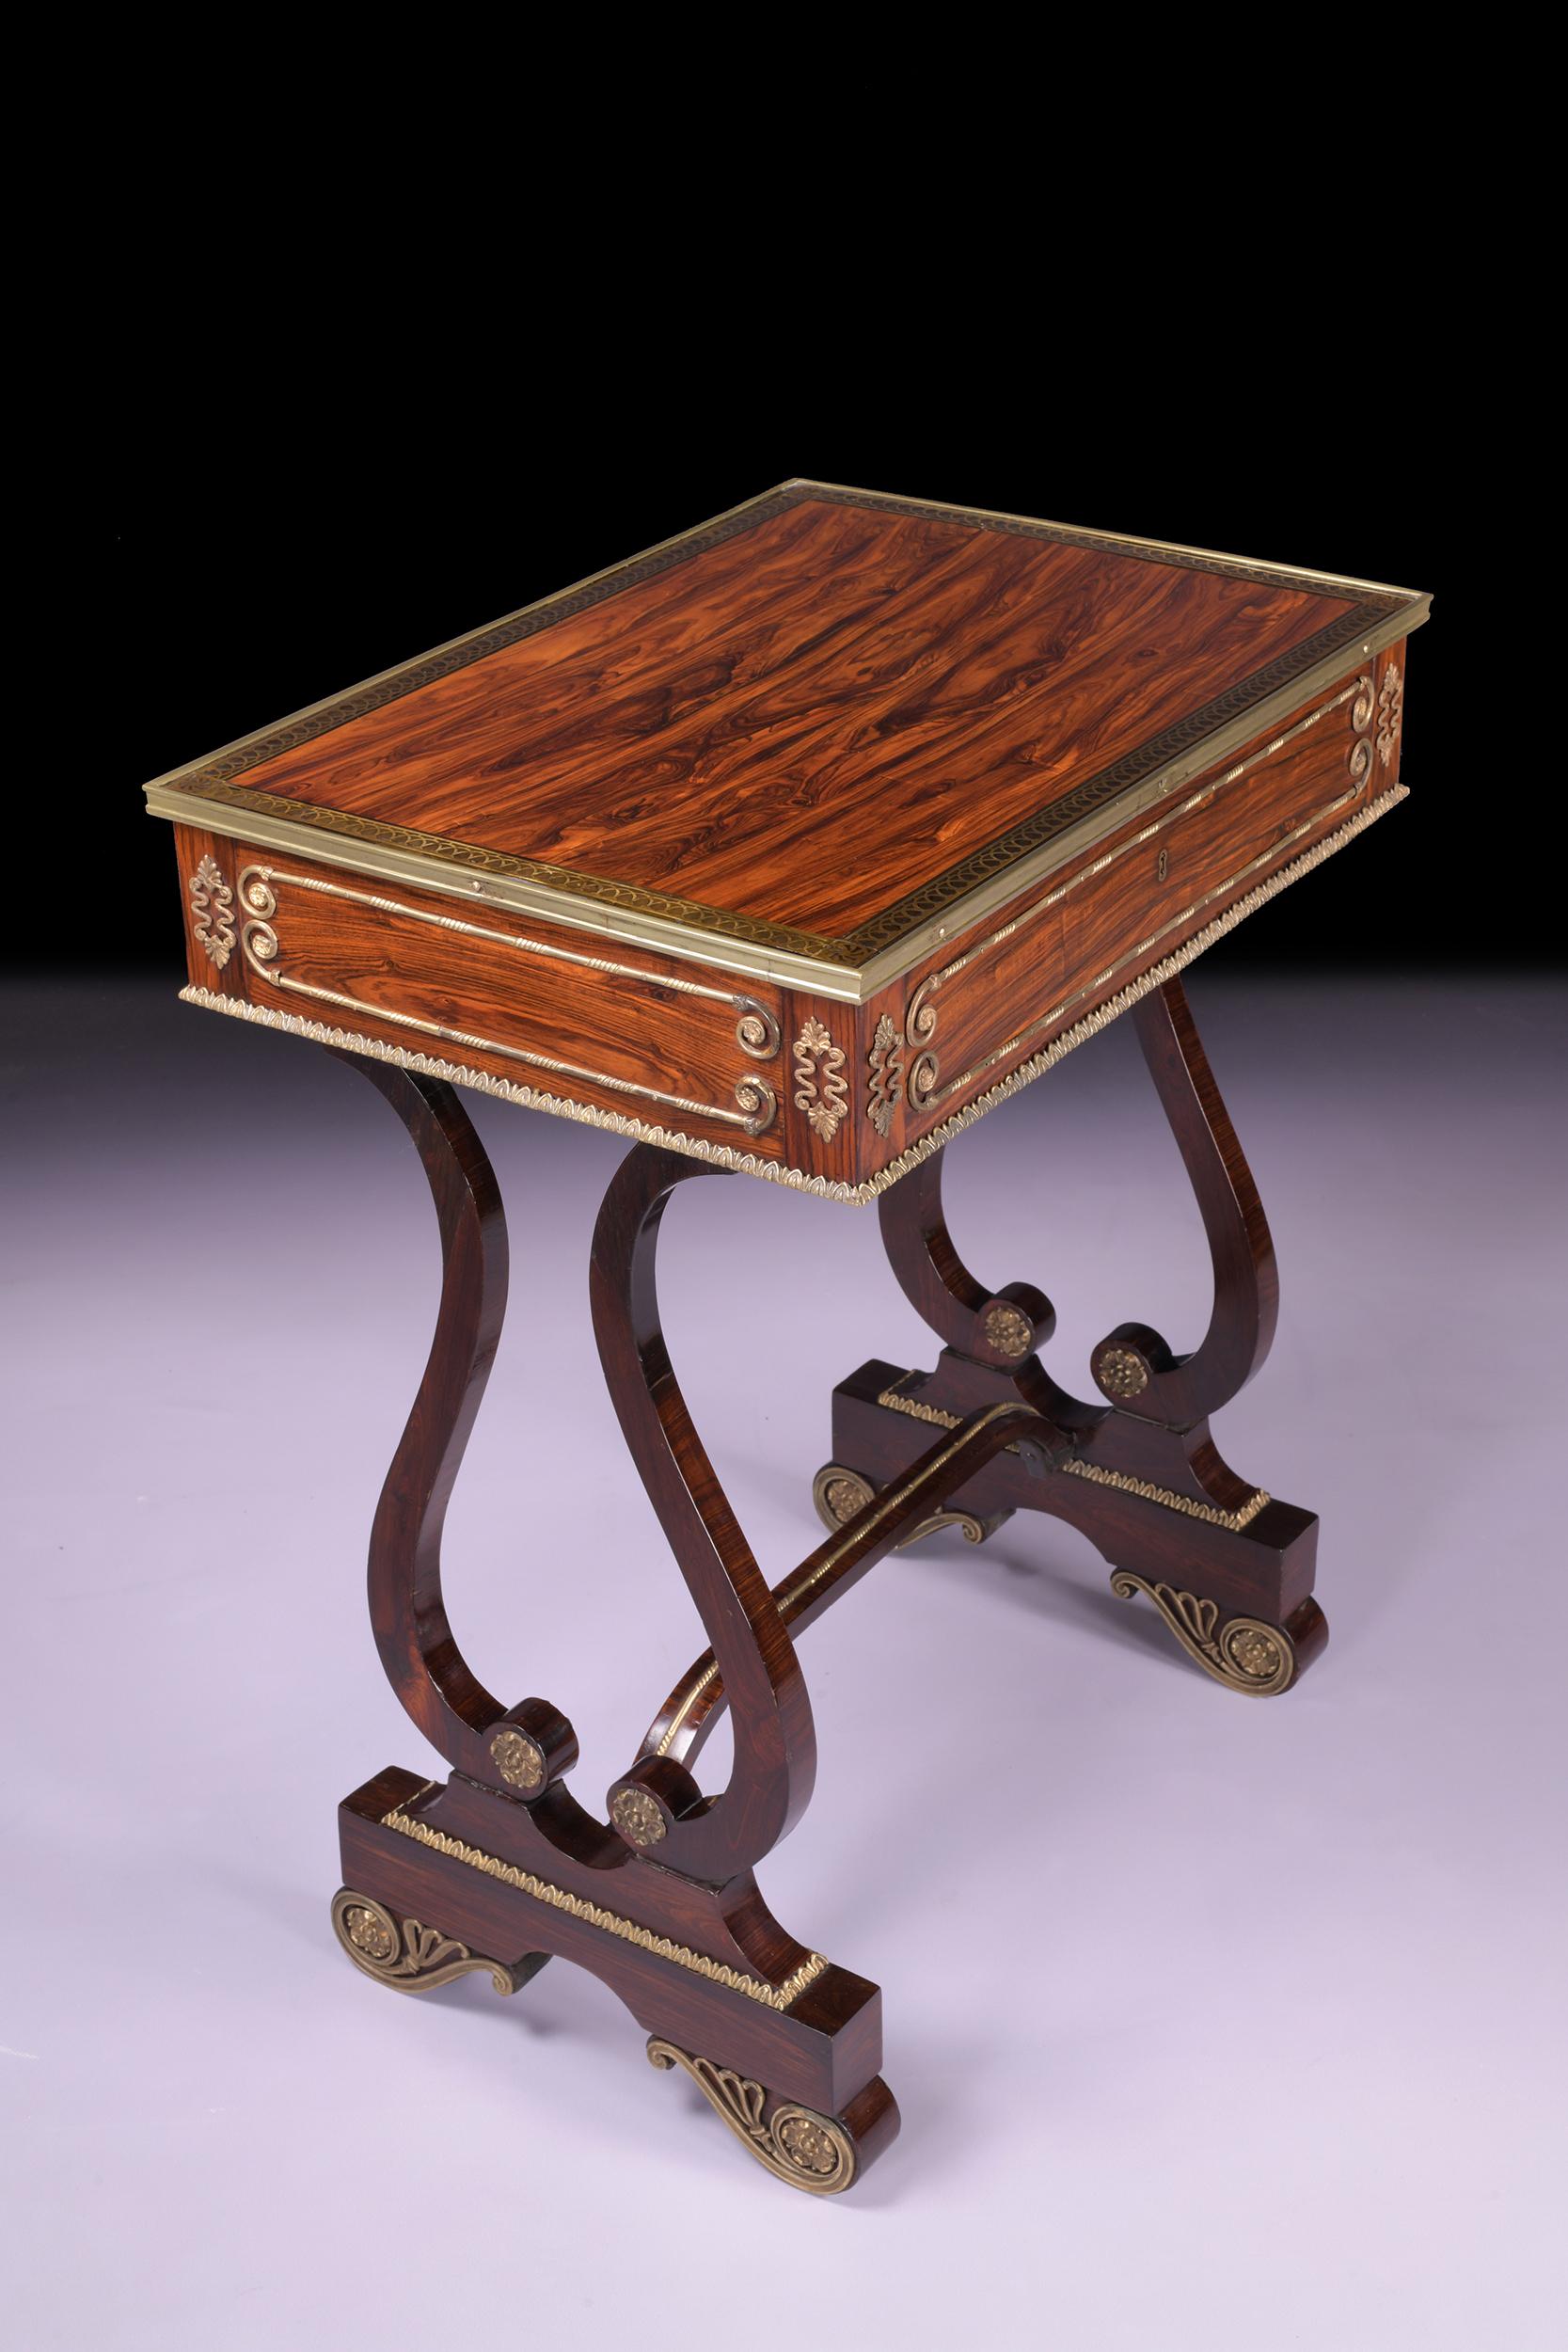 A very fine Regency Gonzalo Alves and crossbanded, ebony and brass inlaid and mounted side table in the manner of John McClean. Applied with gilt bronze mounts, the rectangular top inlaid with an ebony band with stylised leaf brass marquetry, above